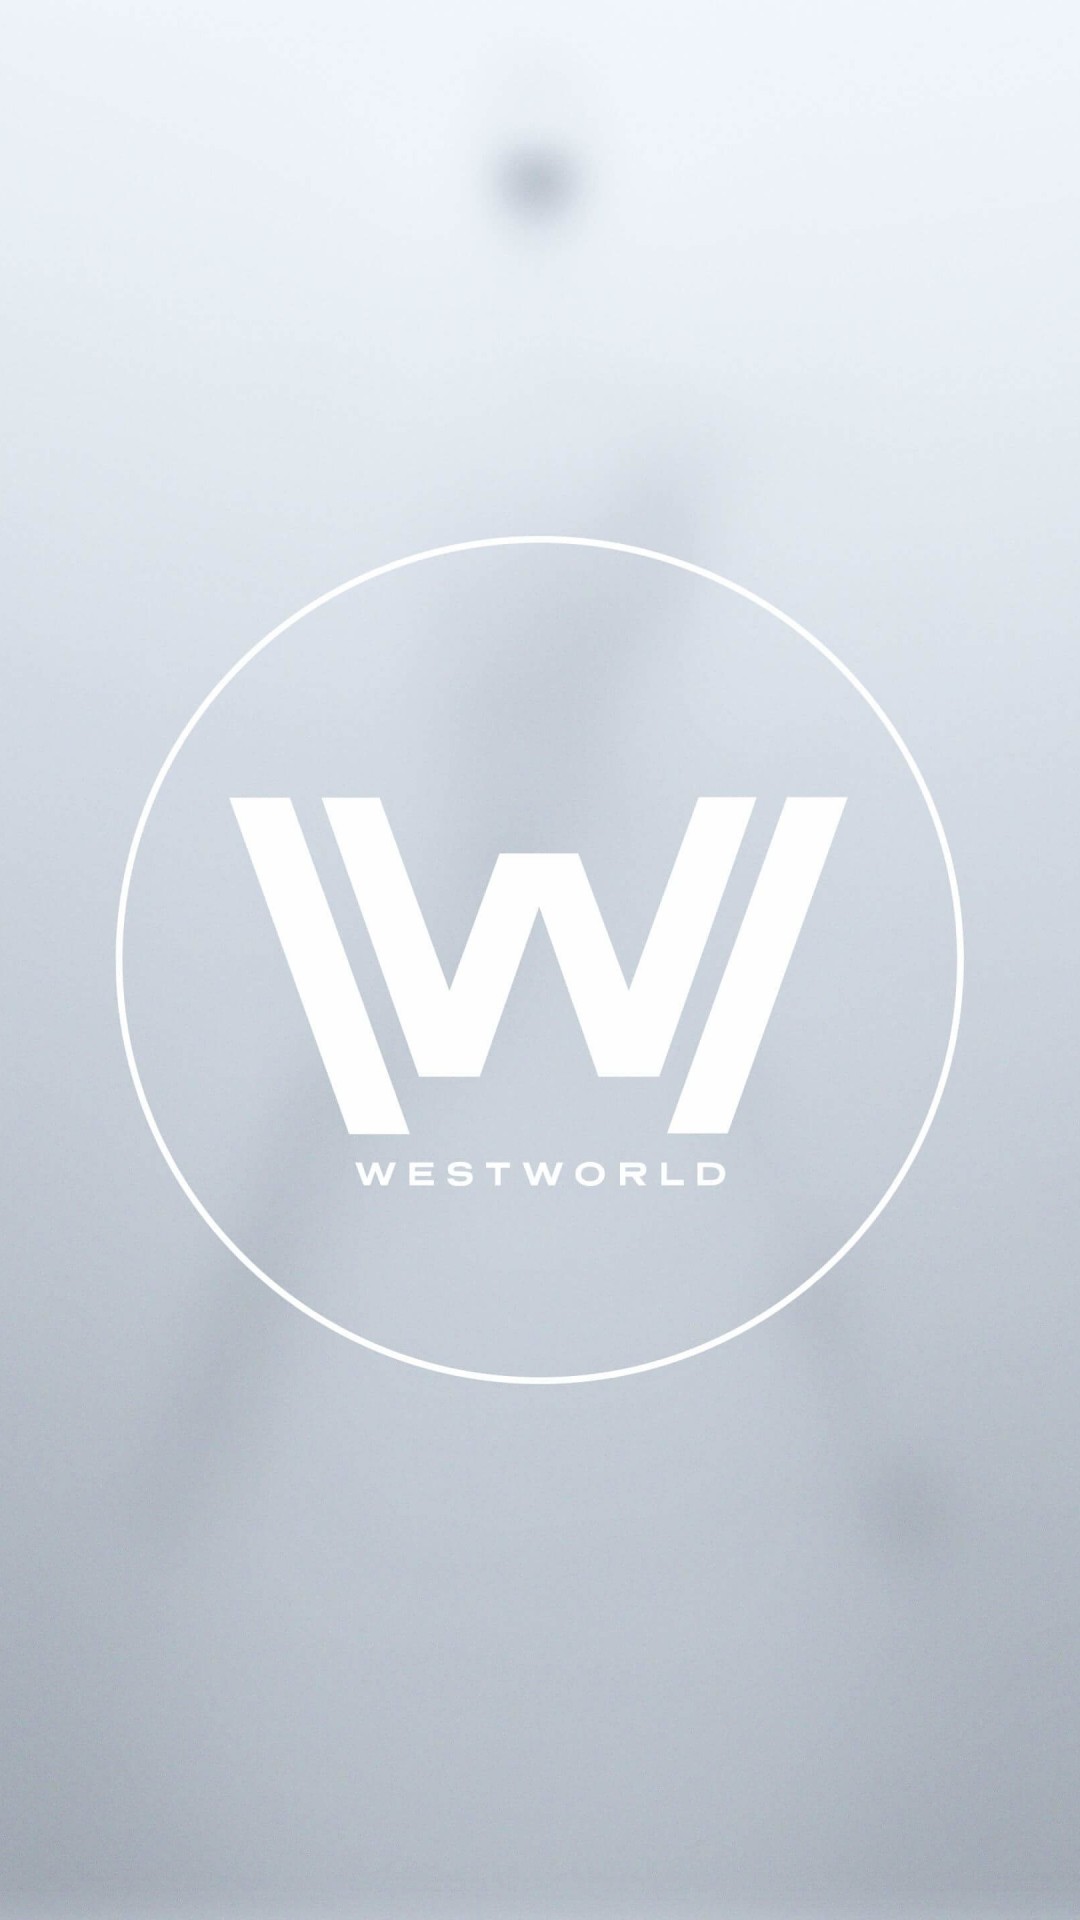 Westworld Logo Wallpaper for HTC One